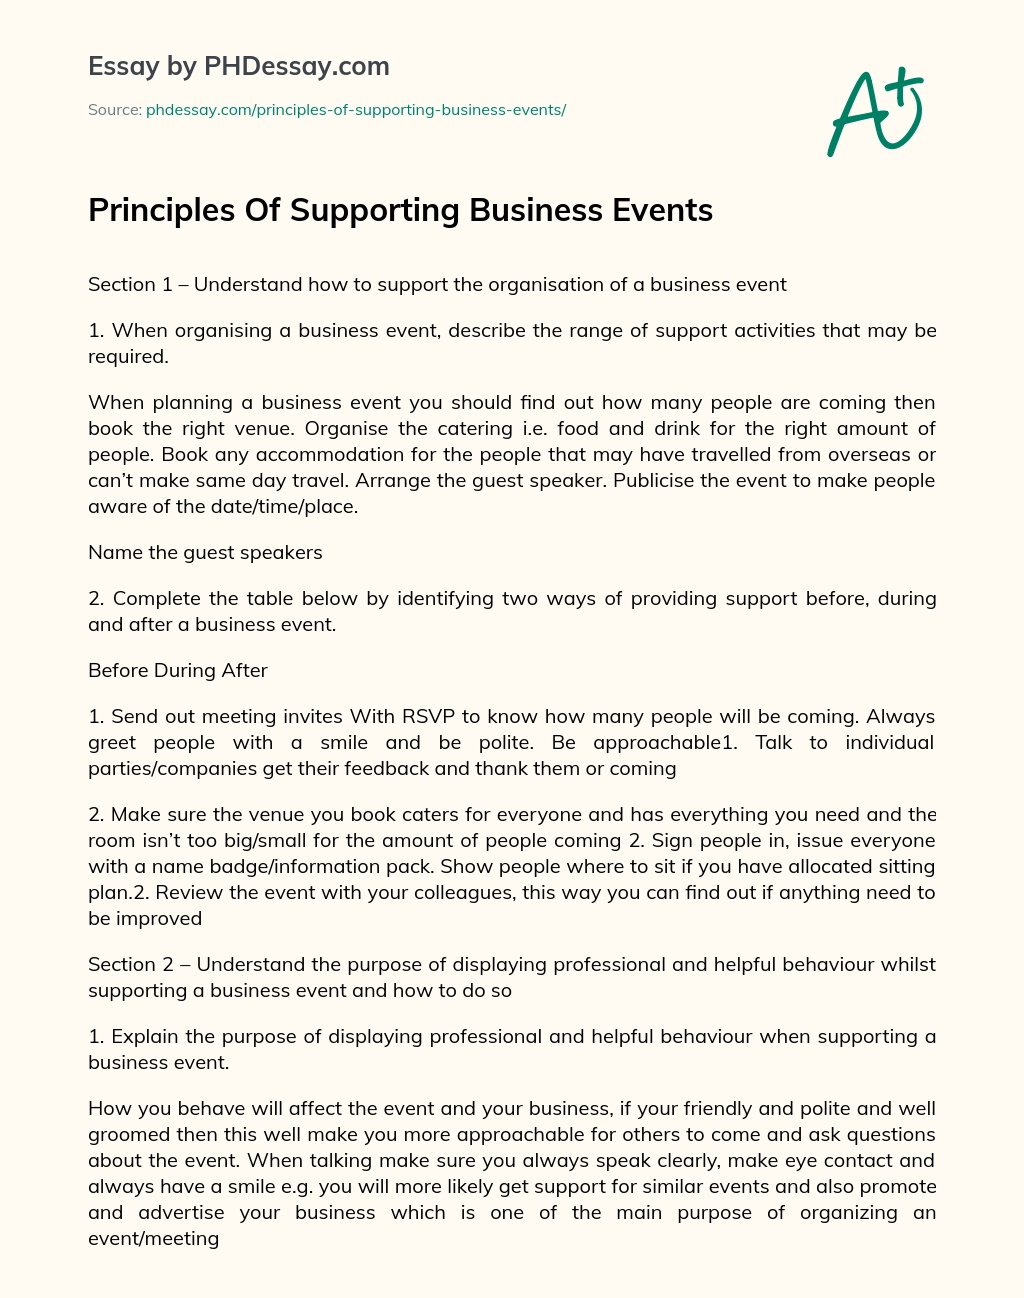 Principles Of Supporting Business Events essay